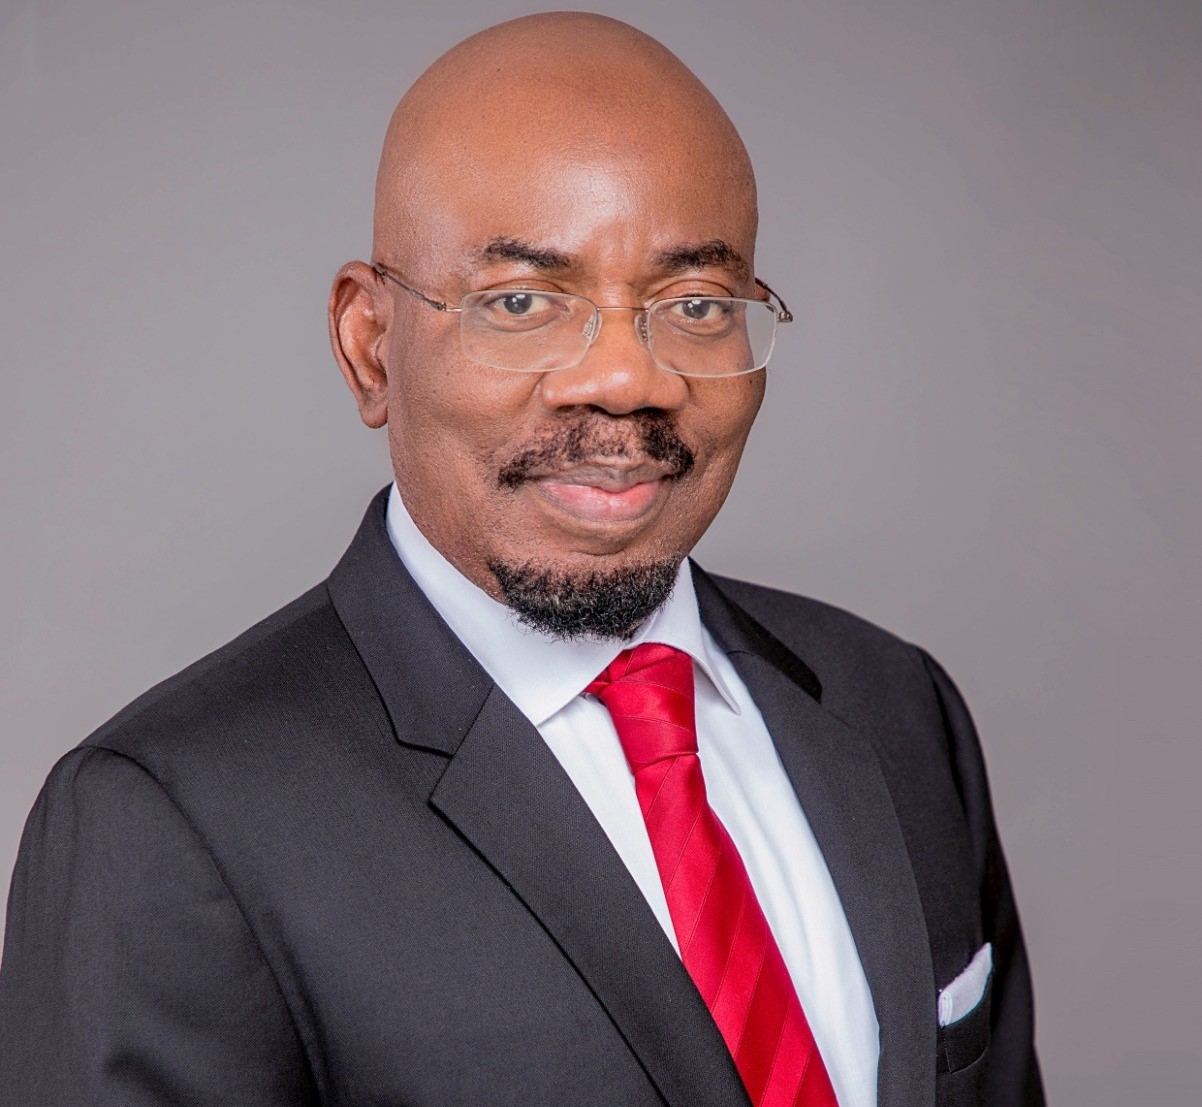 Despite Challenging Macroeconomic Conditions And Economic Headwinds, Zenith Bank Delivers Value To Shareholders, Pays Out N125.59 Billion Dividend